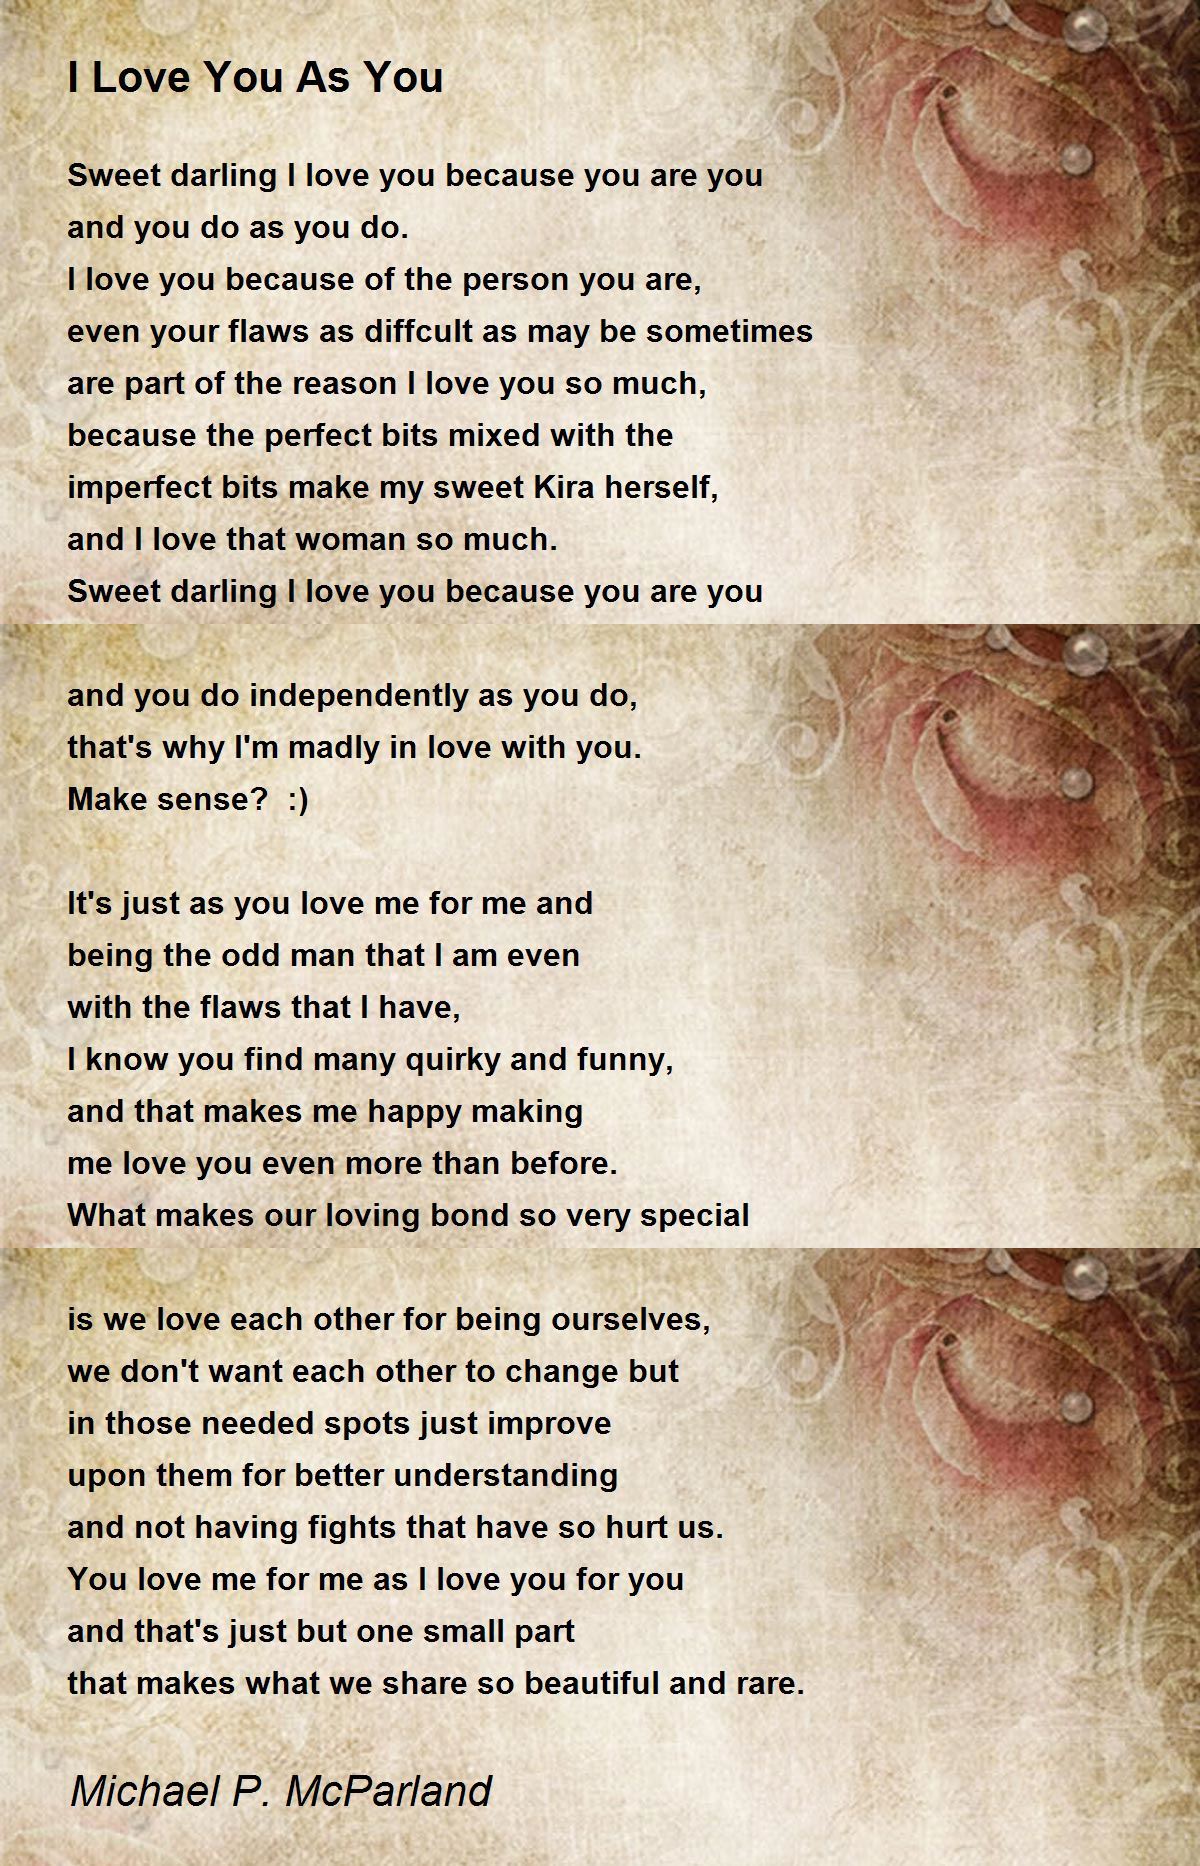 I Love You As You - I Love You As You Poem by Michael P. McParland